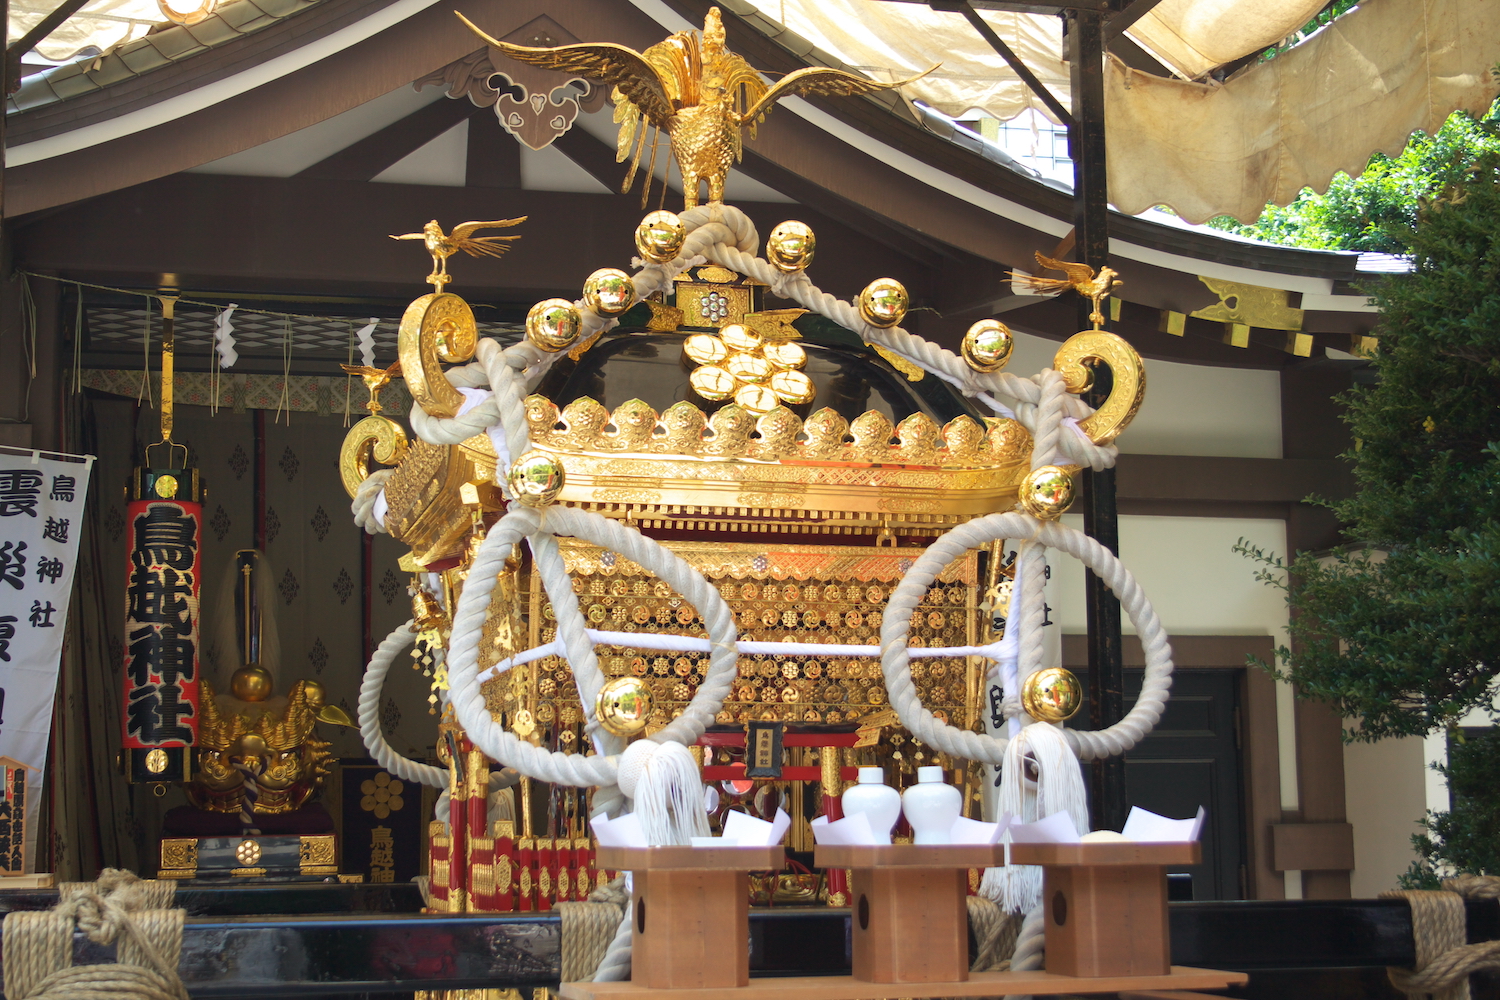 The portable shrine, mikoshi with phoenix on top